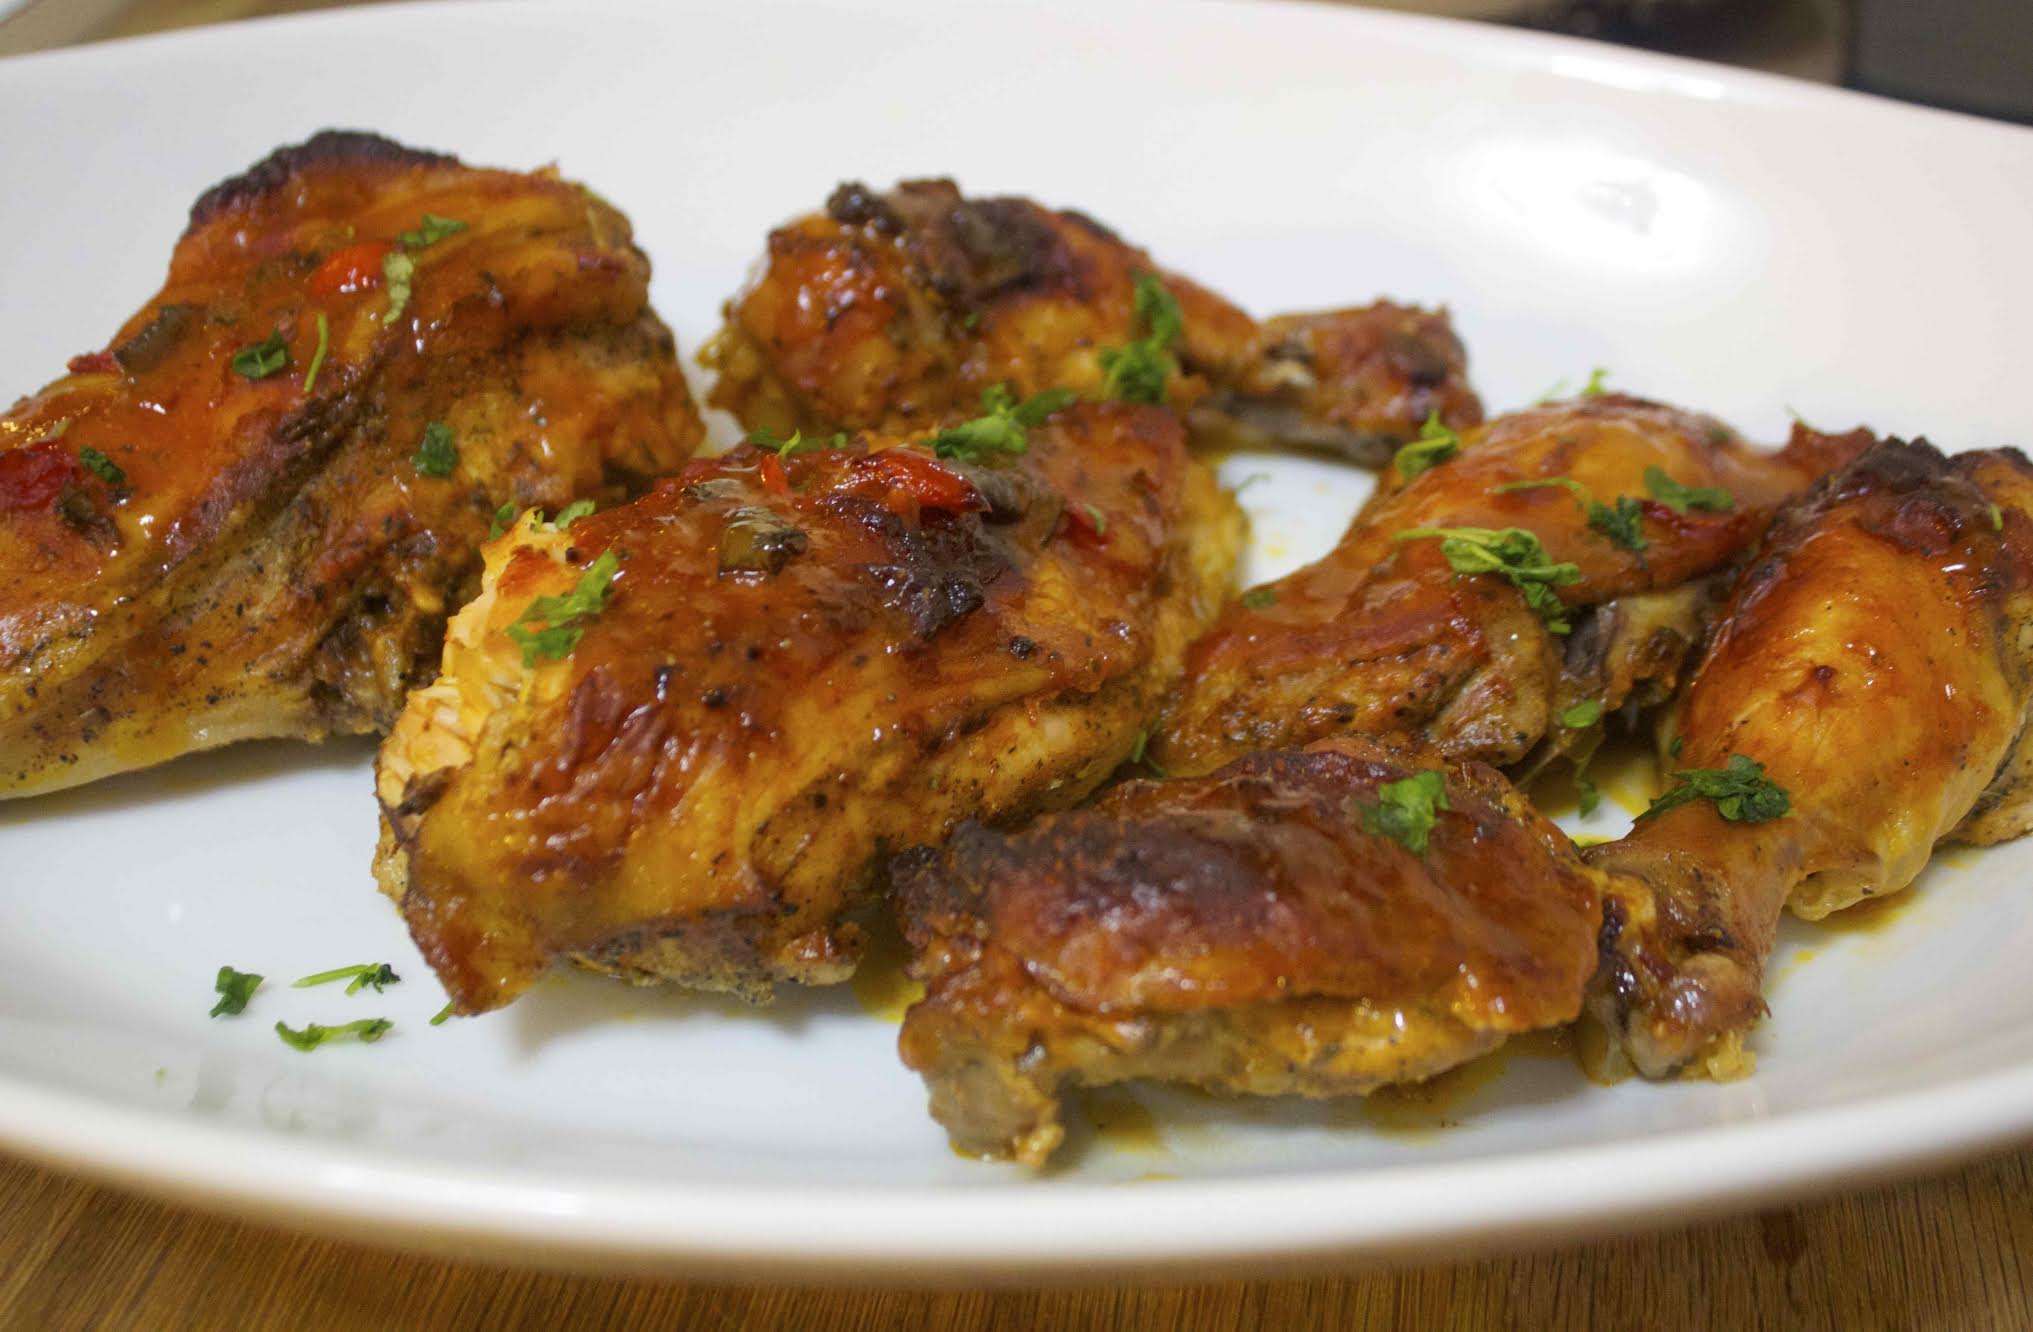 Cuban Roast Chicken or Pollo Asado is a staple in most Latin cuisines. 